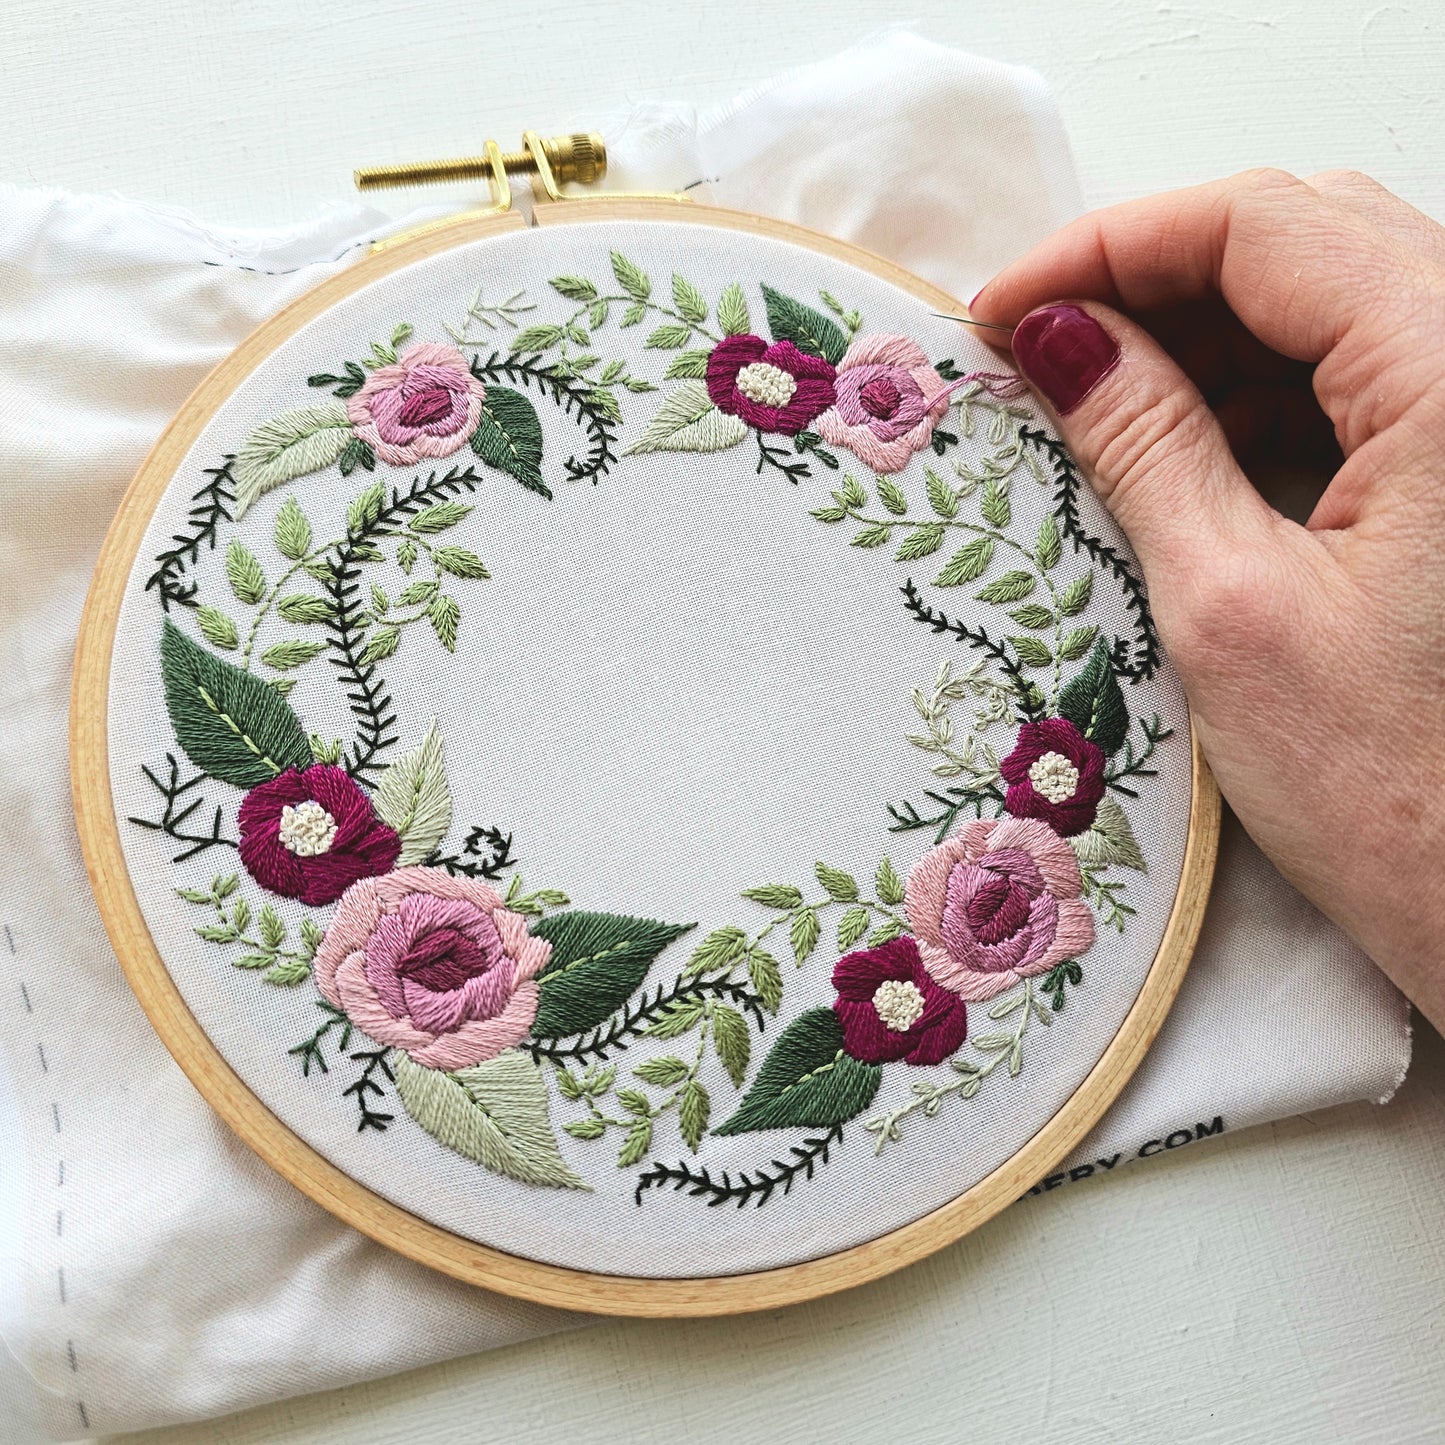 Floral Wreath Embroidery Kit